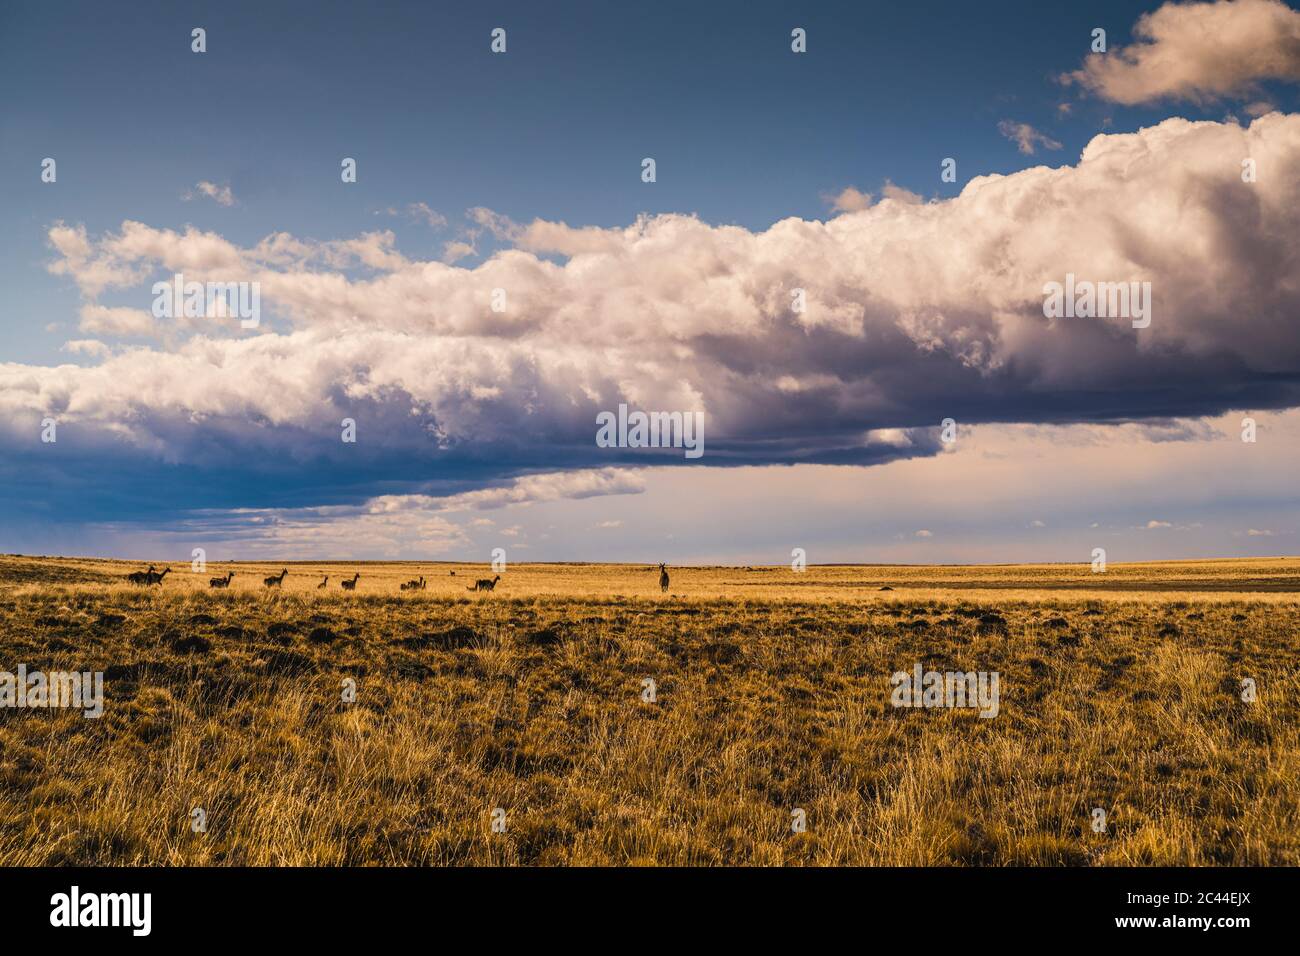 Argentina, Large clouds over guanacos (Lama guanicoe) grazing in vast grassland Stock Photo